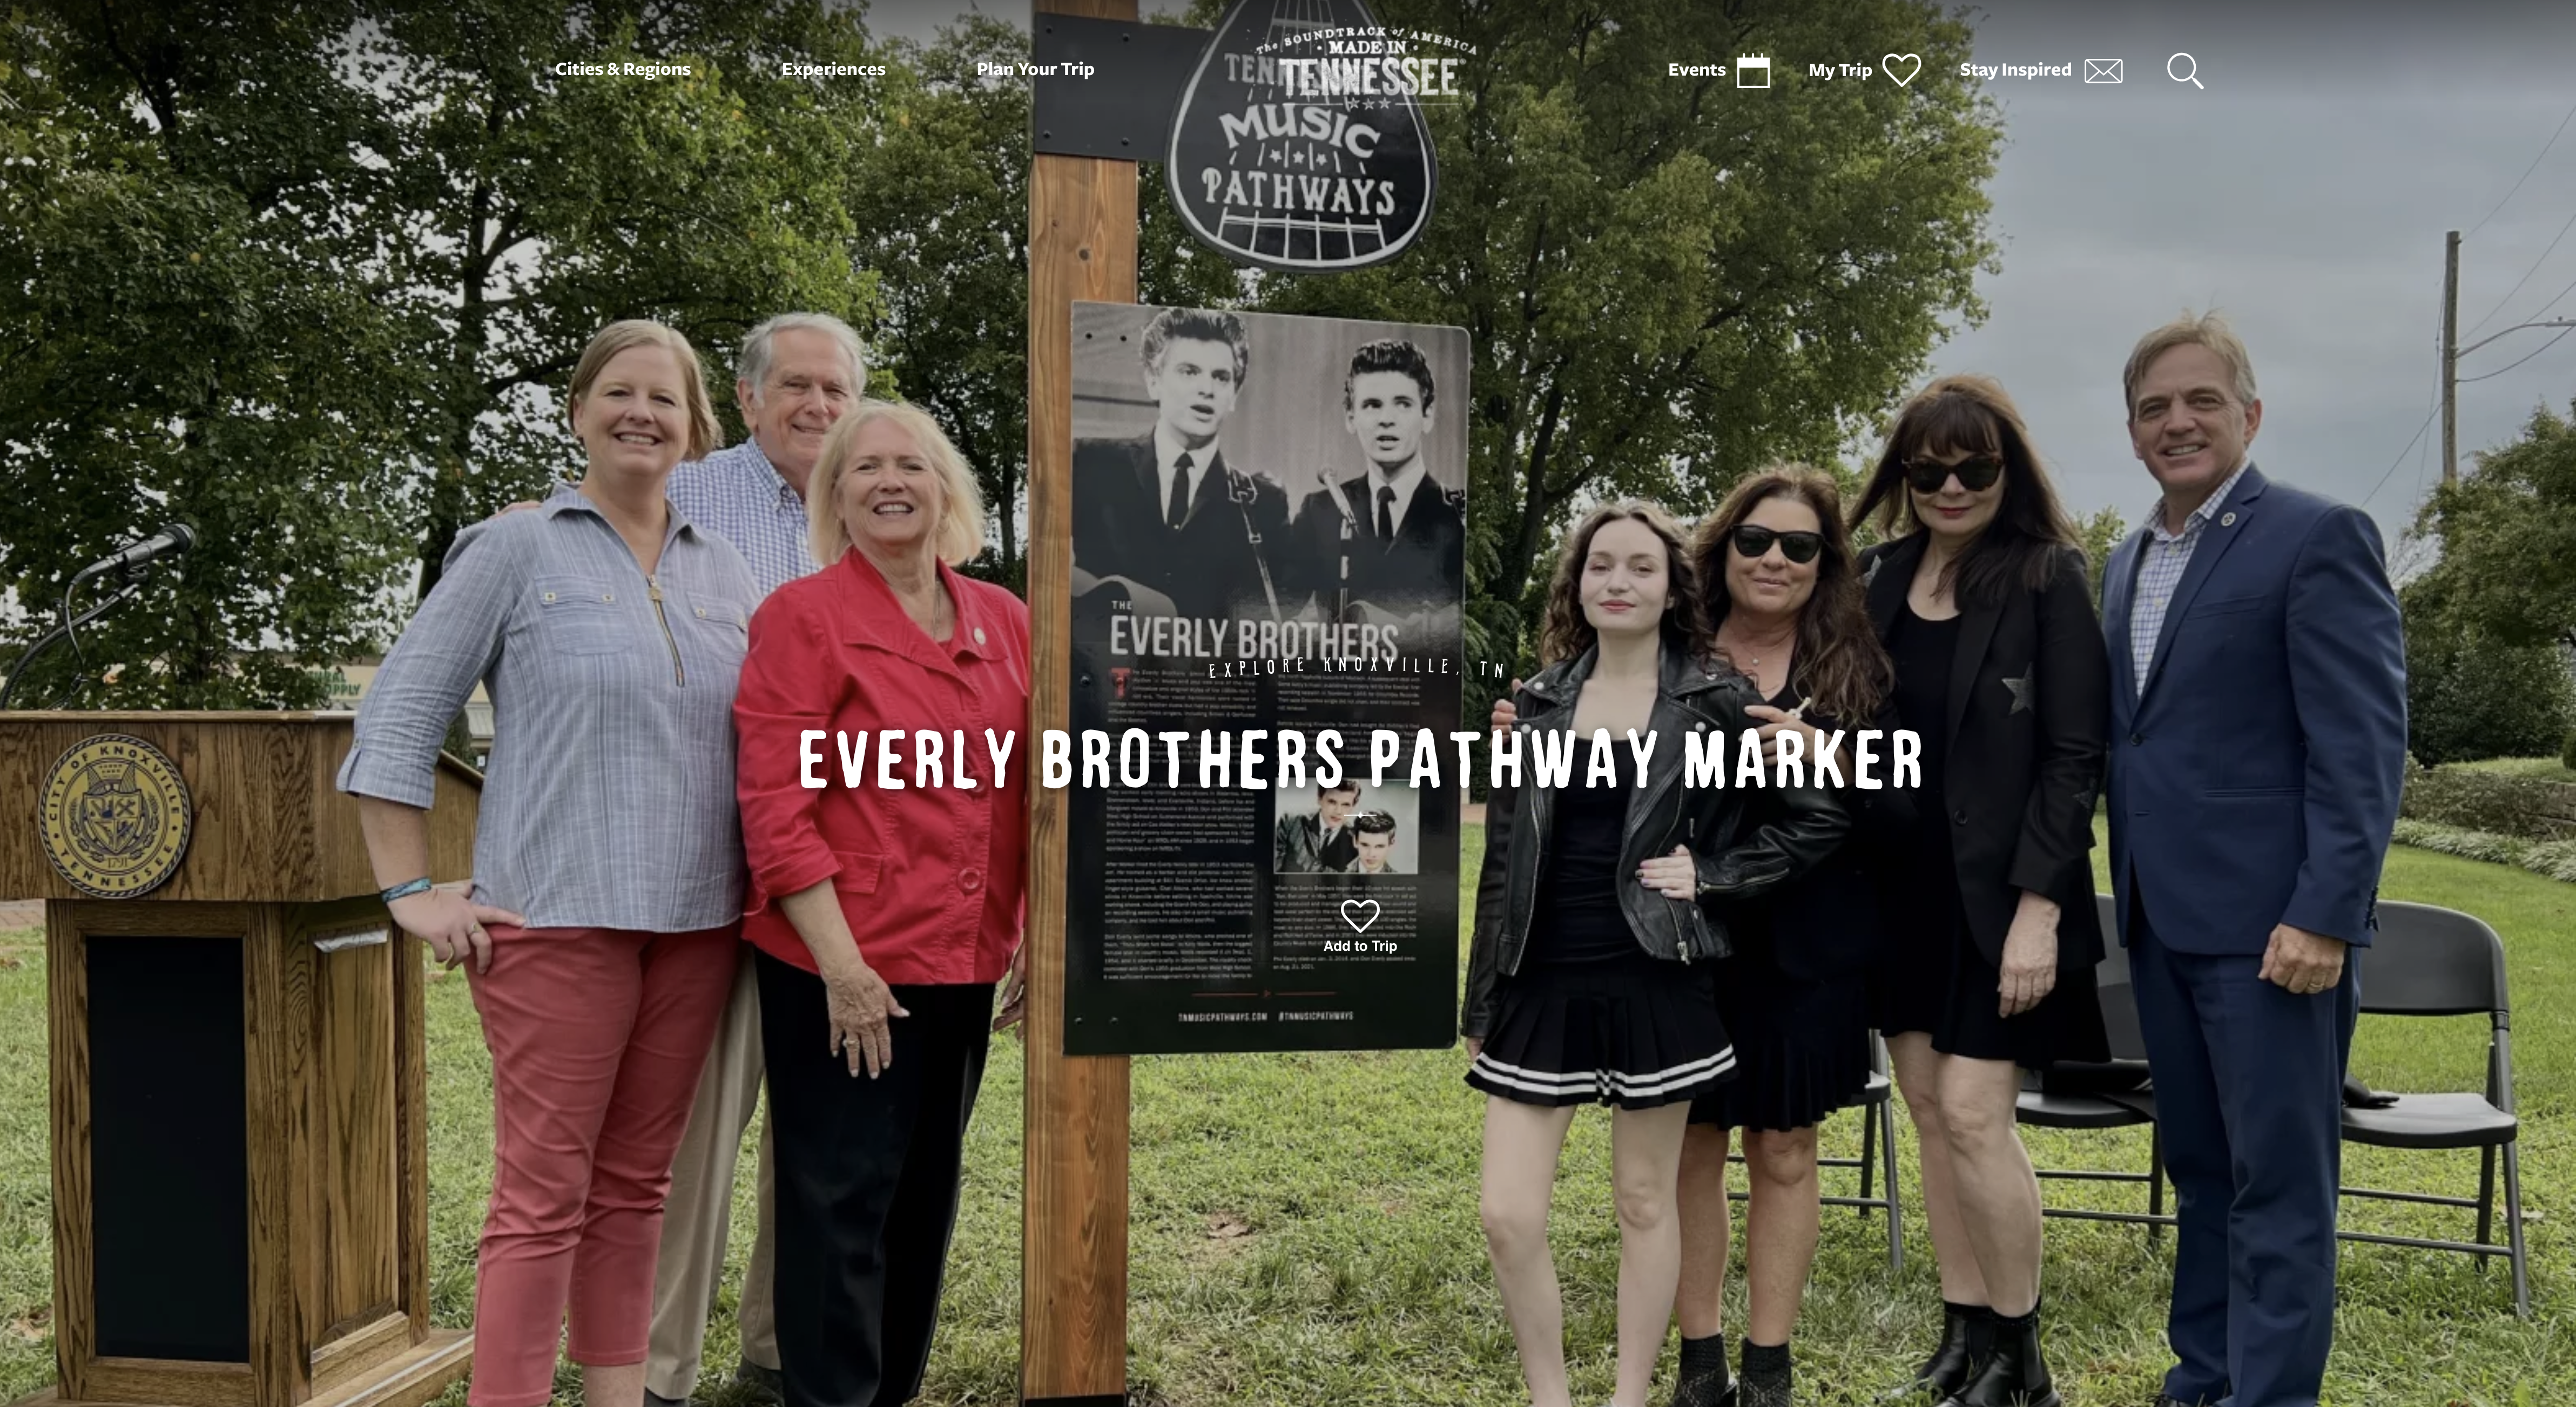 Featured image for “Everly Brothers Park Joins Music Pathway”